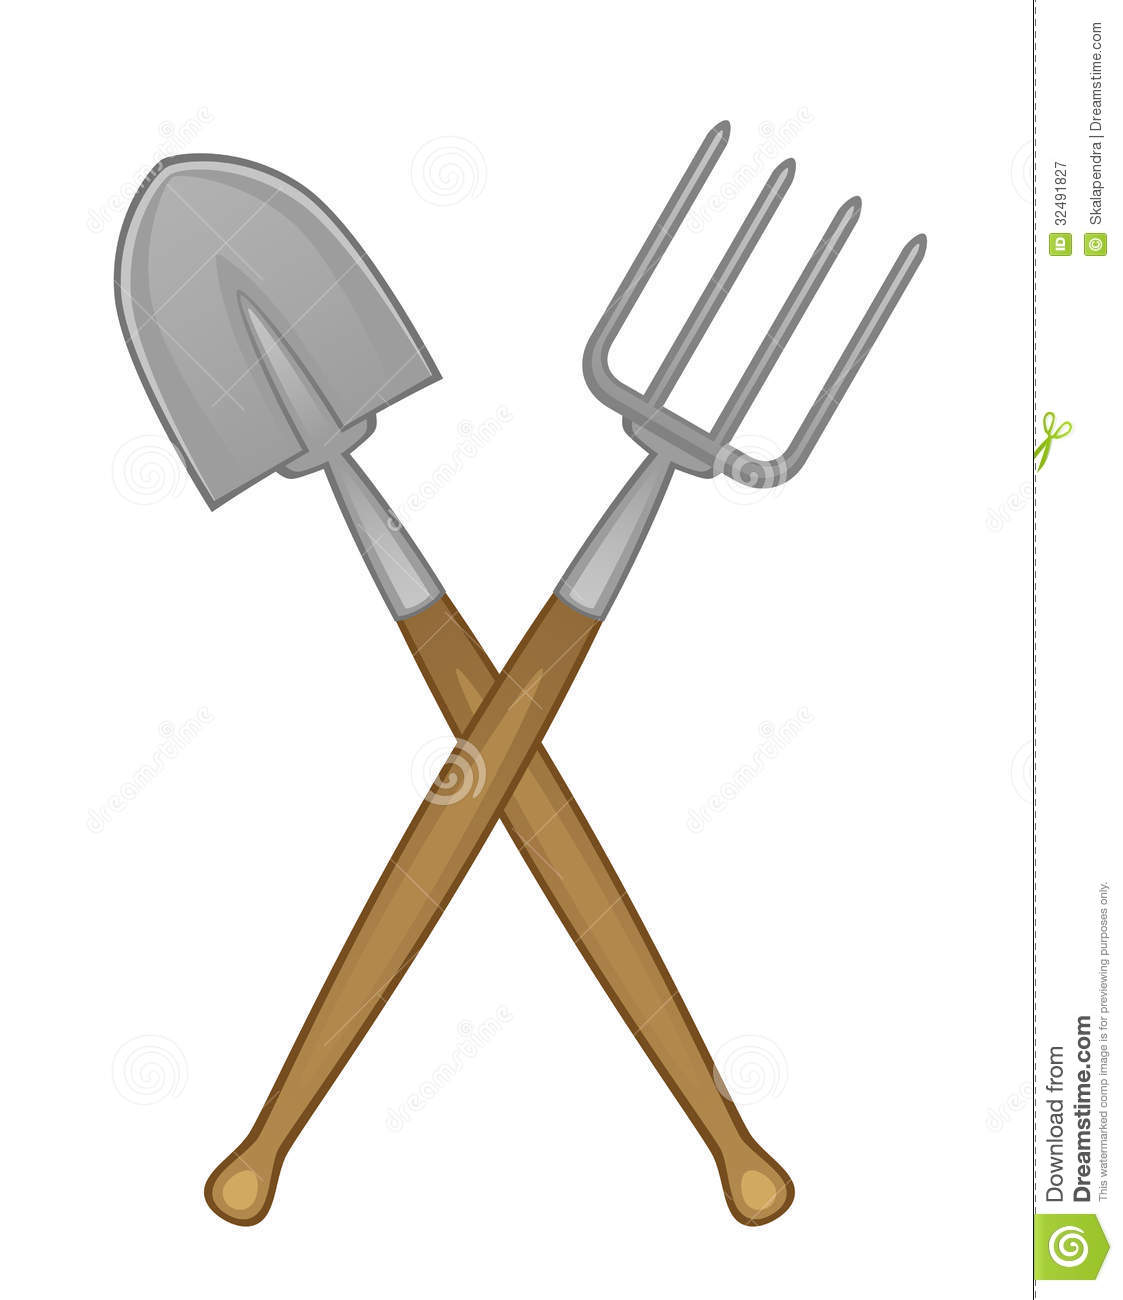 Shovel And Pitchfork Royalty Free Stock Photography   Image  32491827